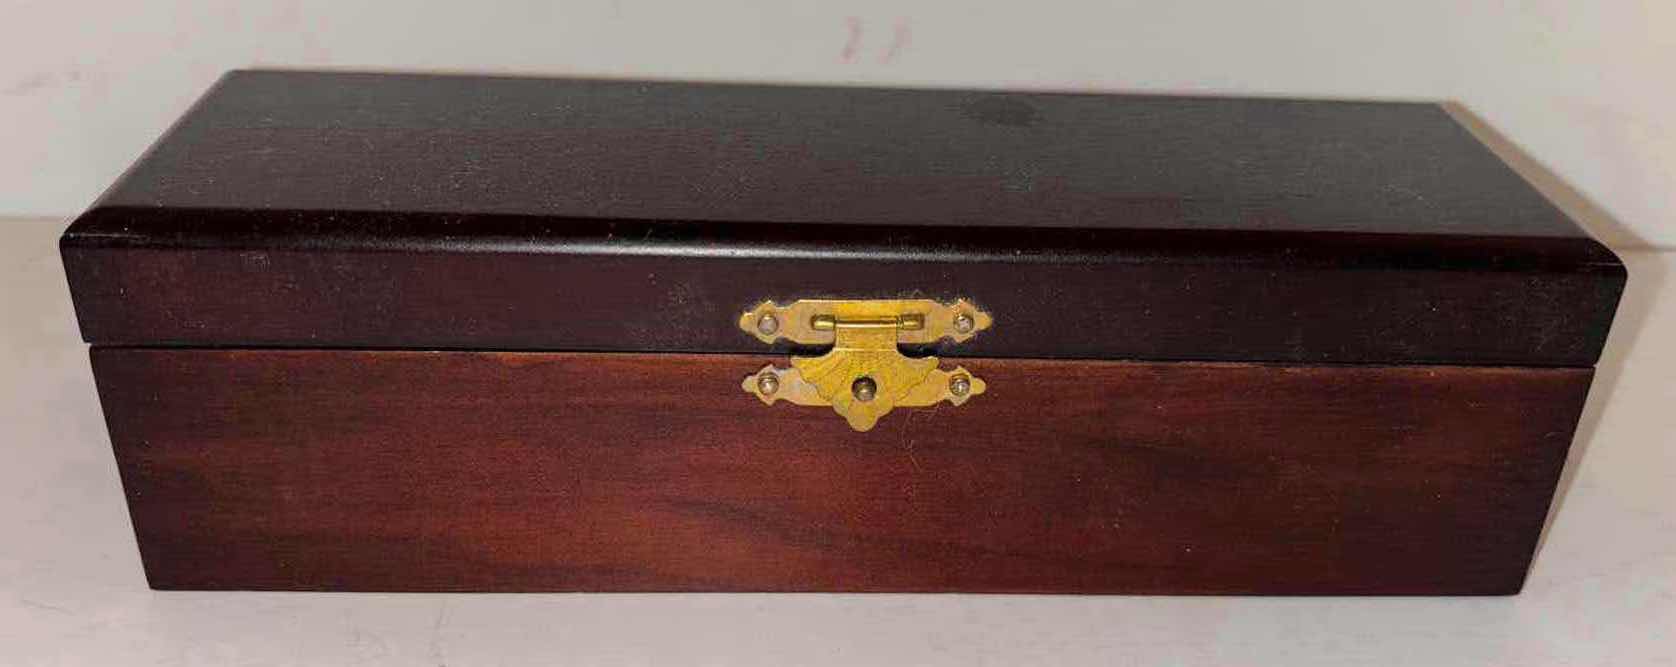 Photo 1 of ANTIQUE TELESCOPE IN WOODEN BOX 30 x 40, JAPAN